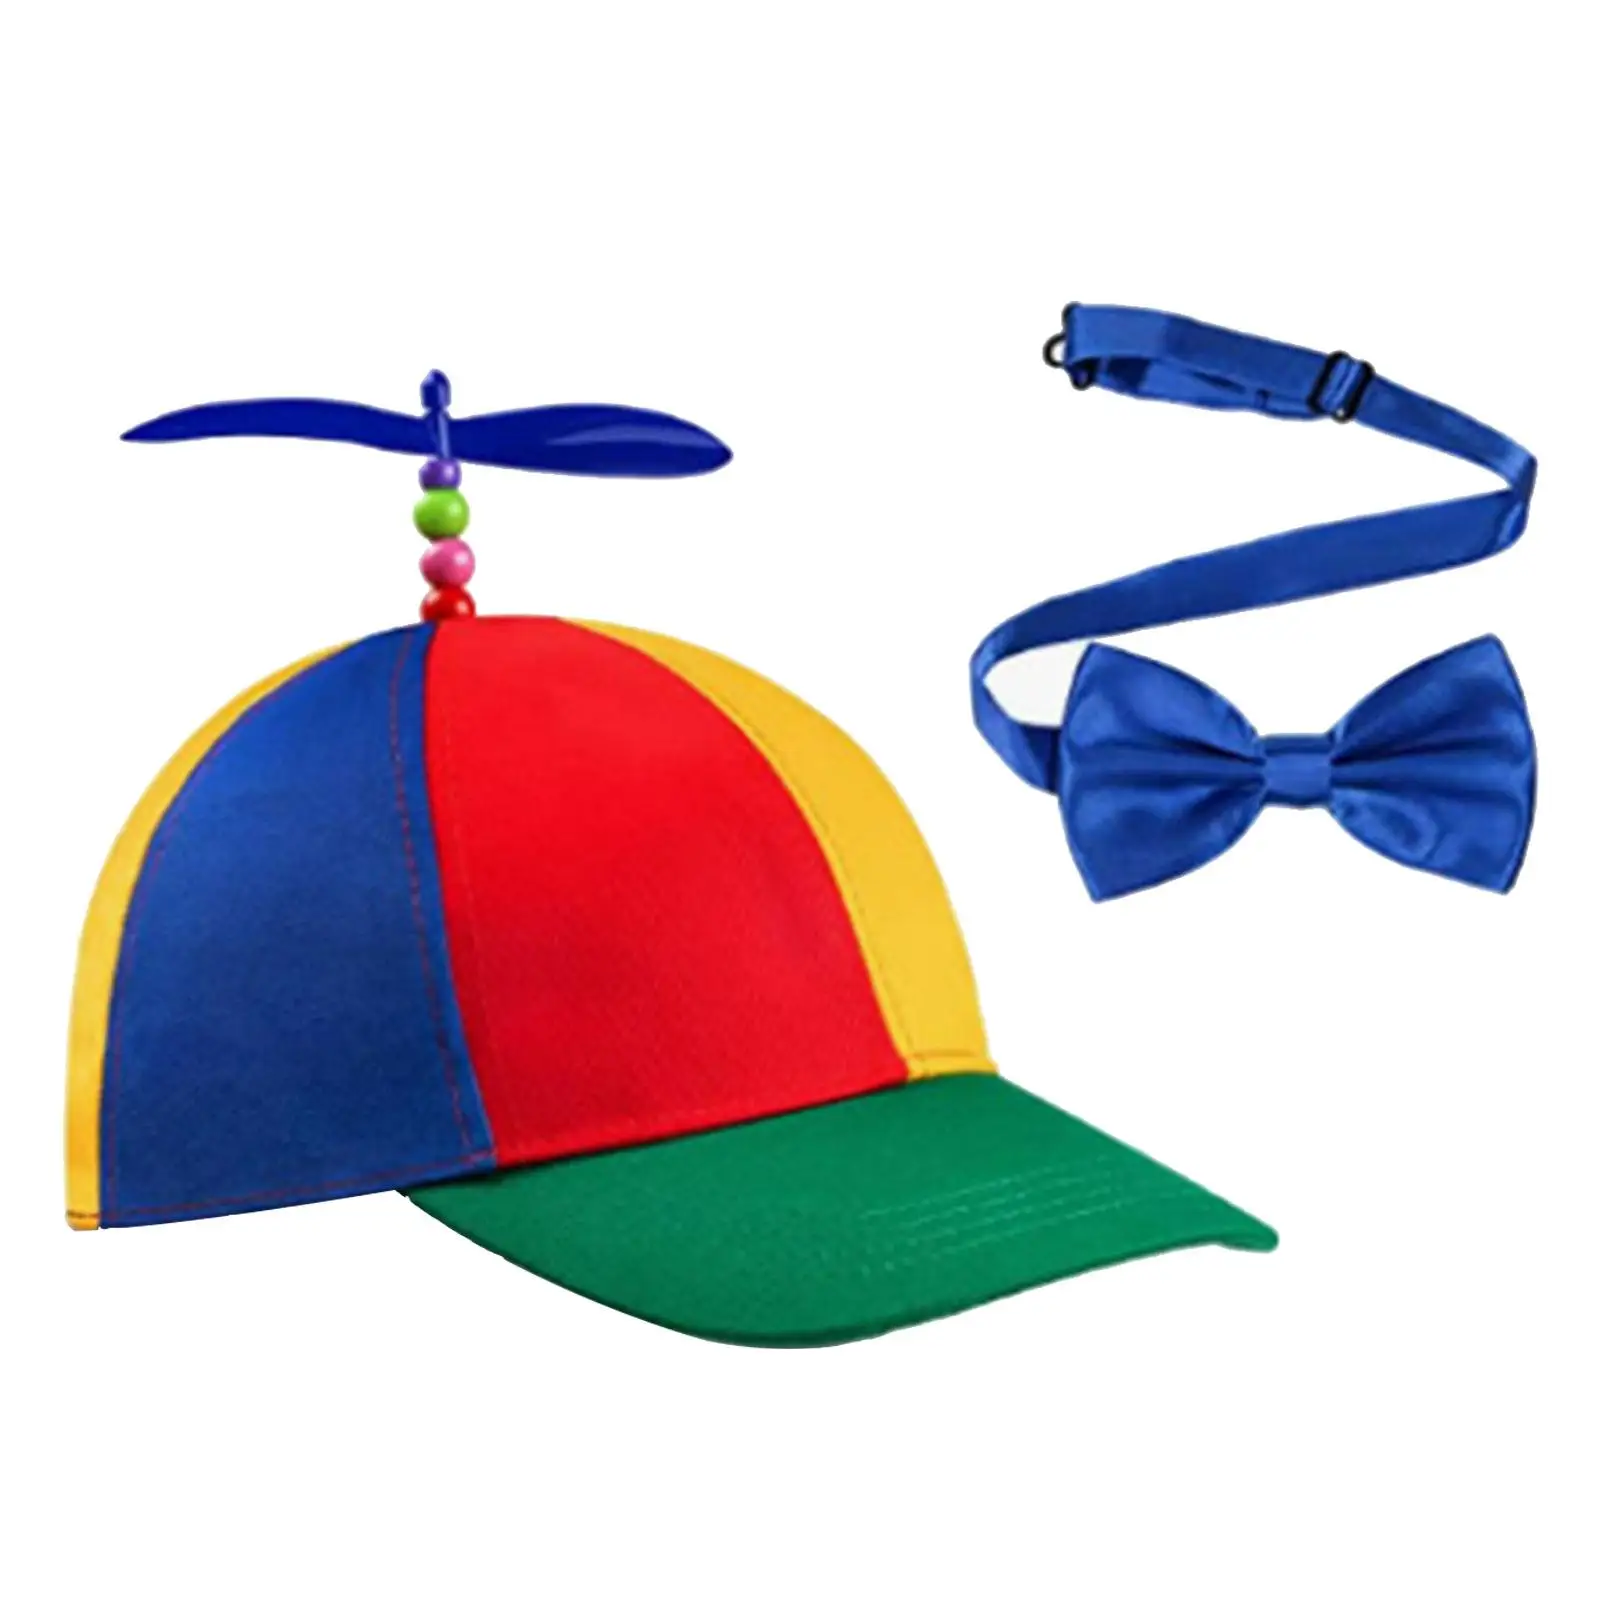 

Helicopter Caps with Propeller on Top Party Favors Kids Propeller Hat for Daily Wear Fancy Dress Outdoor Casual